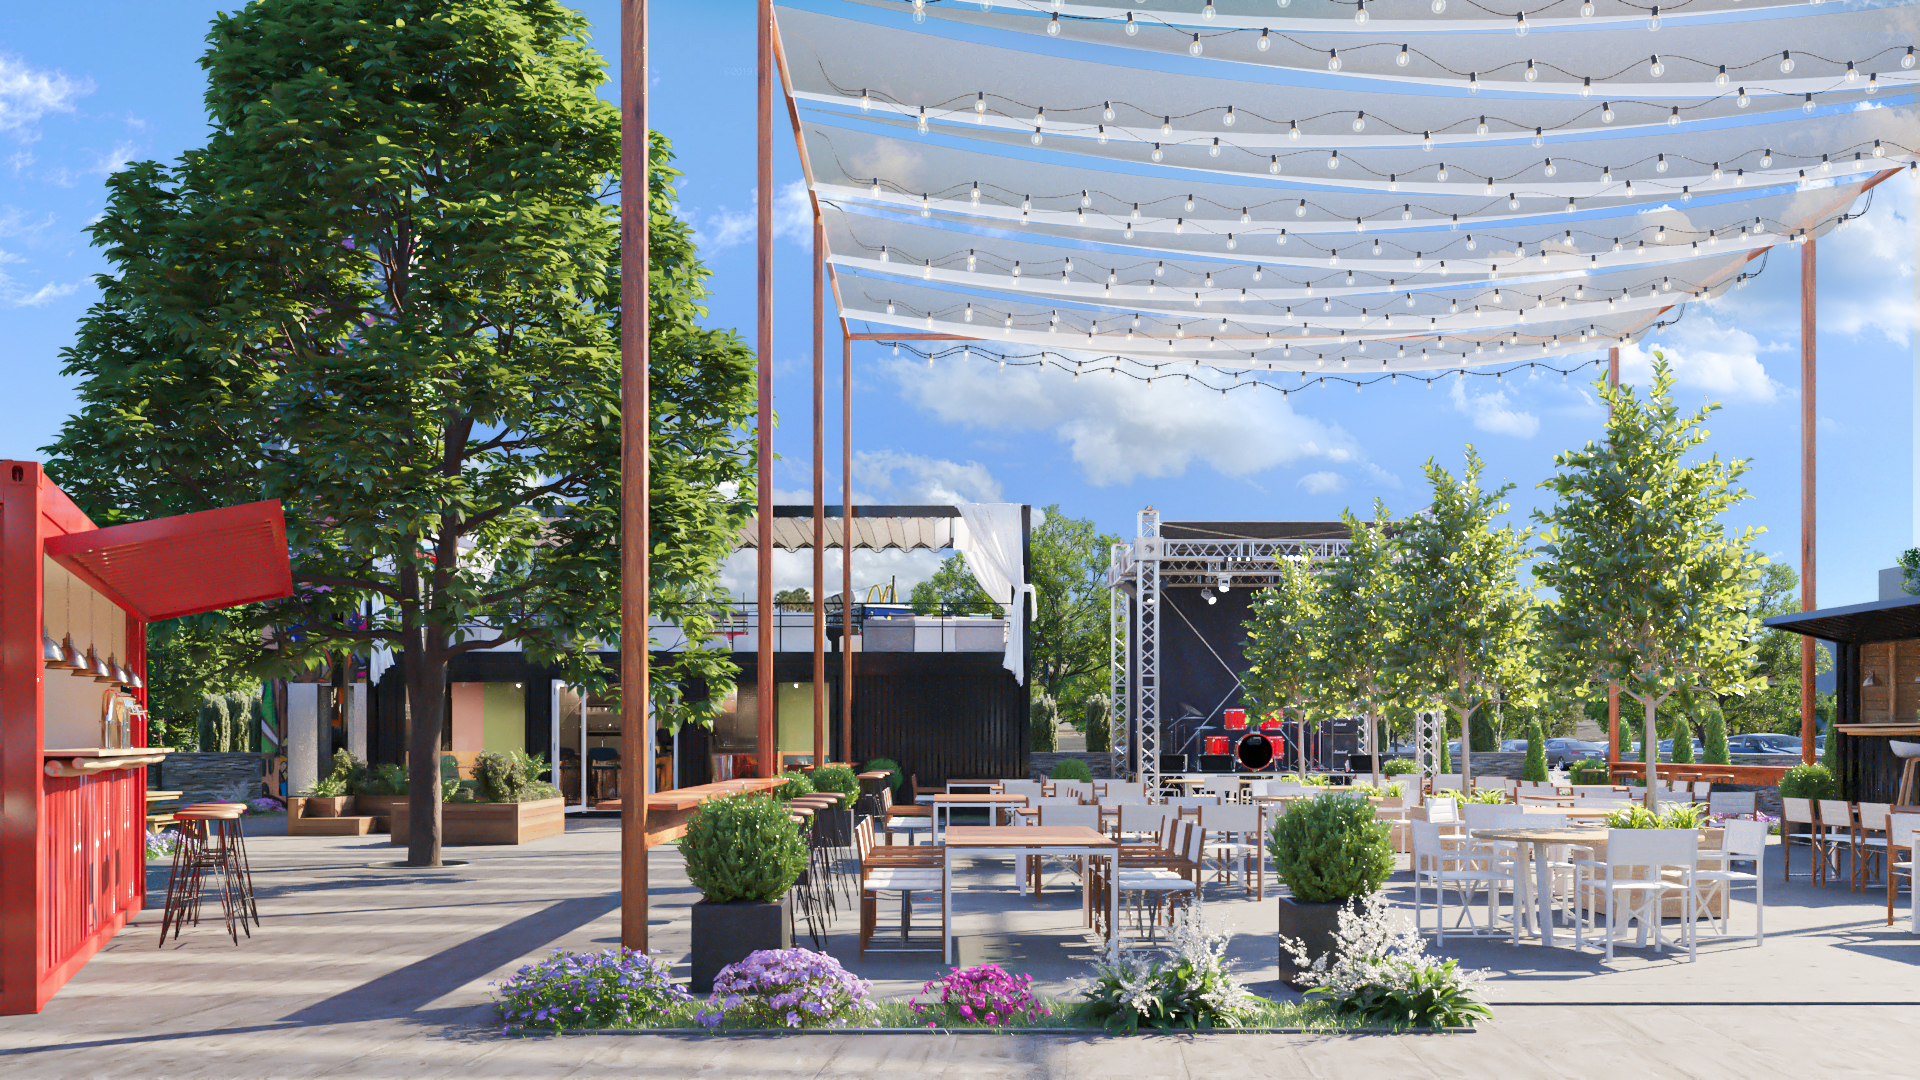 A shipping container food court and entertainment complex is part of the plan for the shopping center.